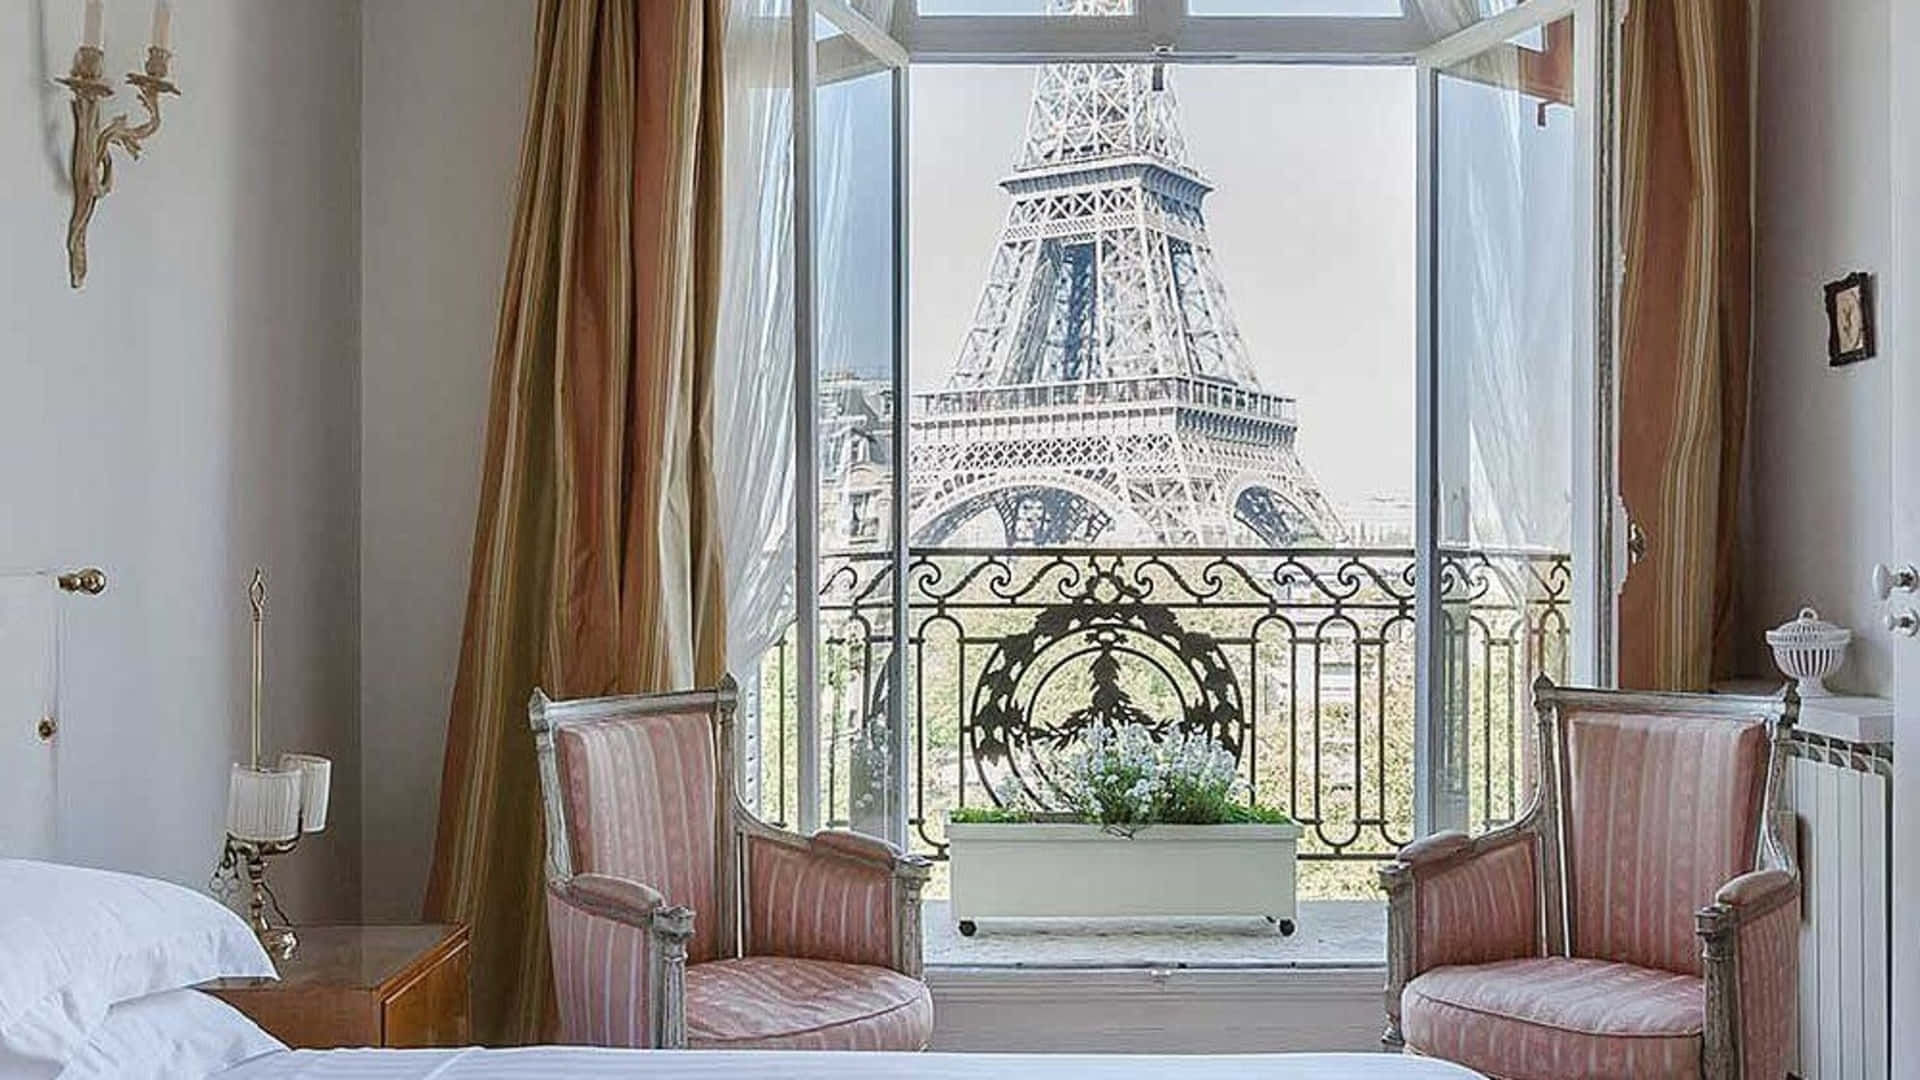 Eiffel Tower View From Hotel Zoom Background